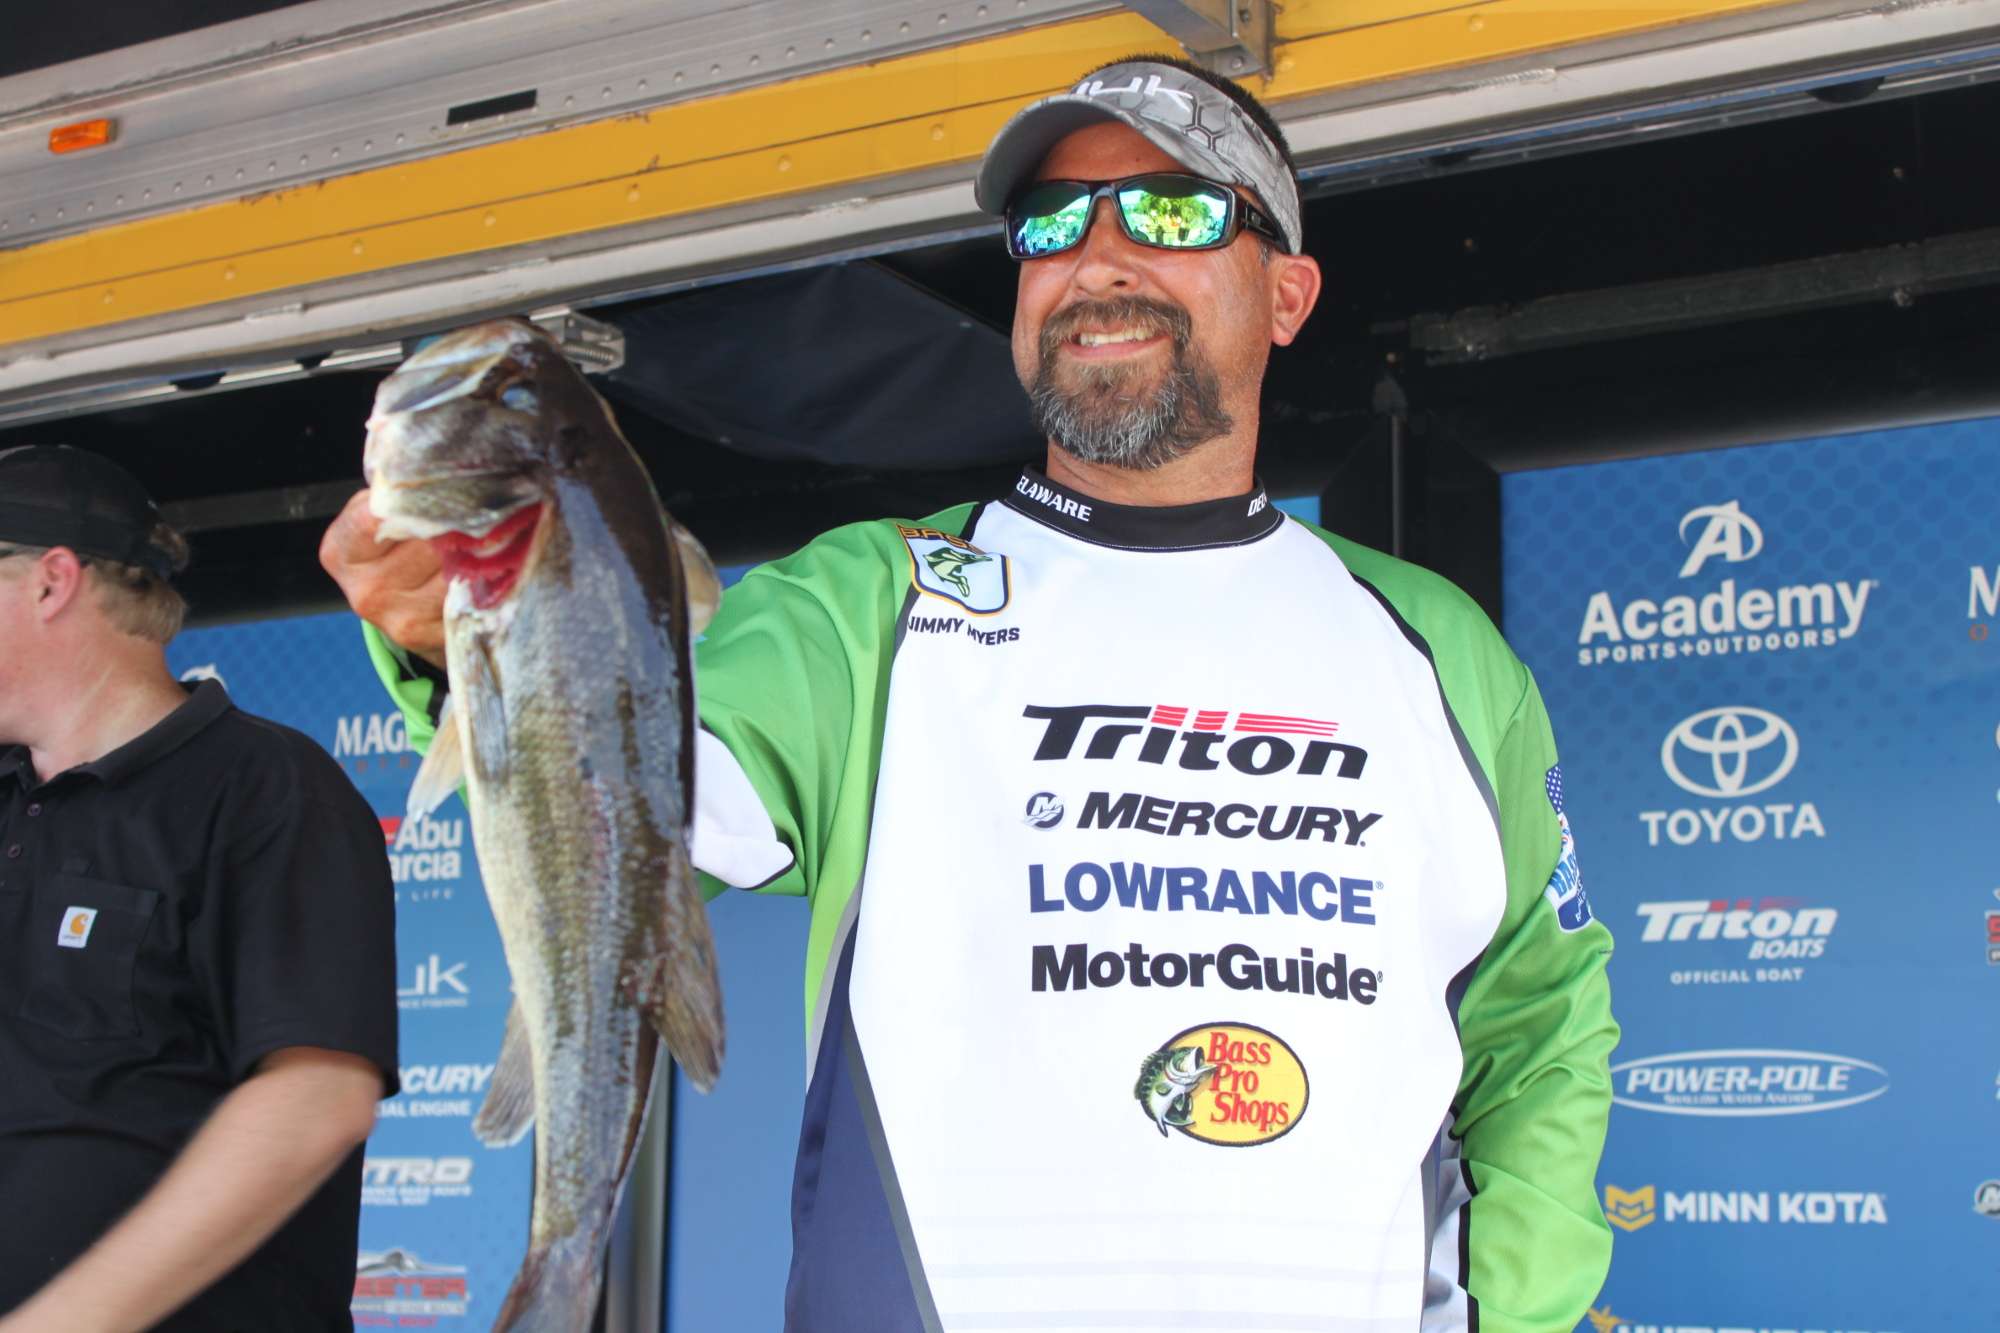 Jimmy Myers of Delaware is second among non-boaters with 12-12 over two days.